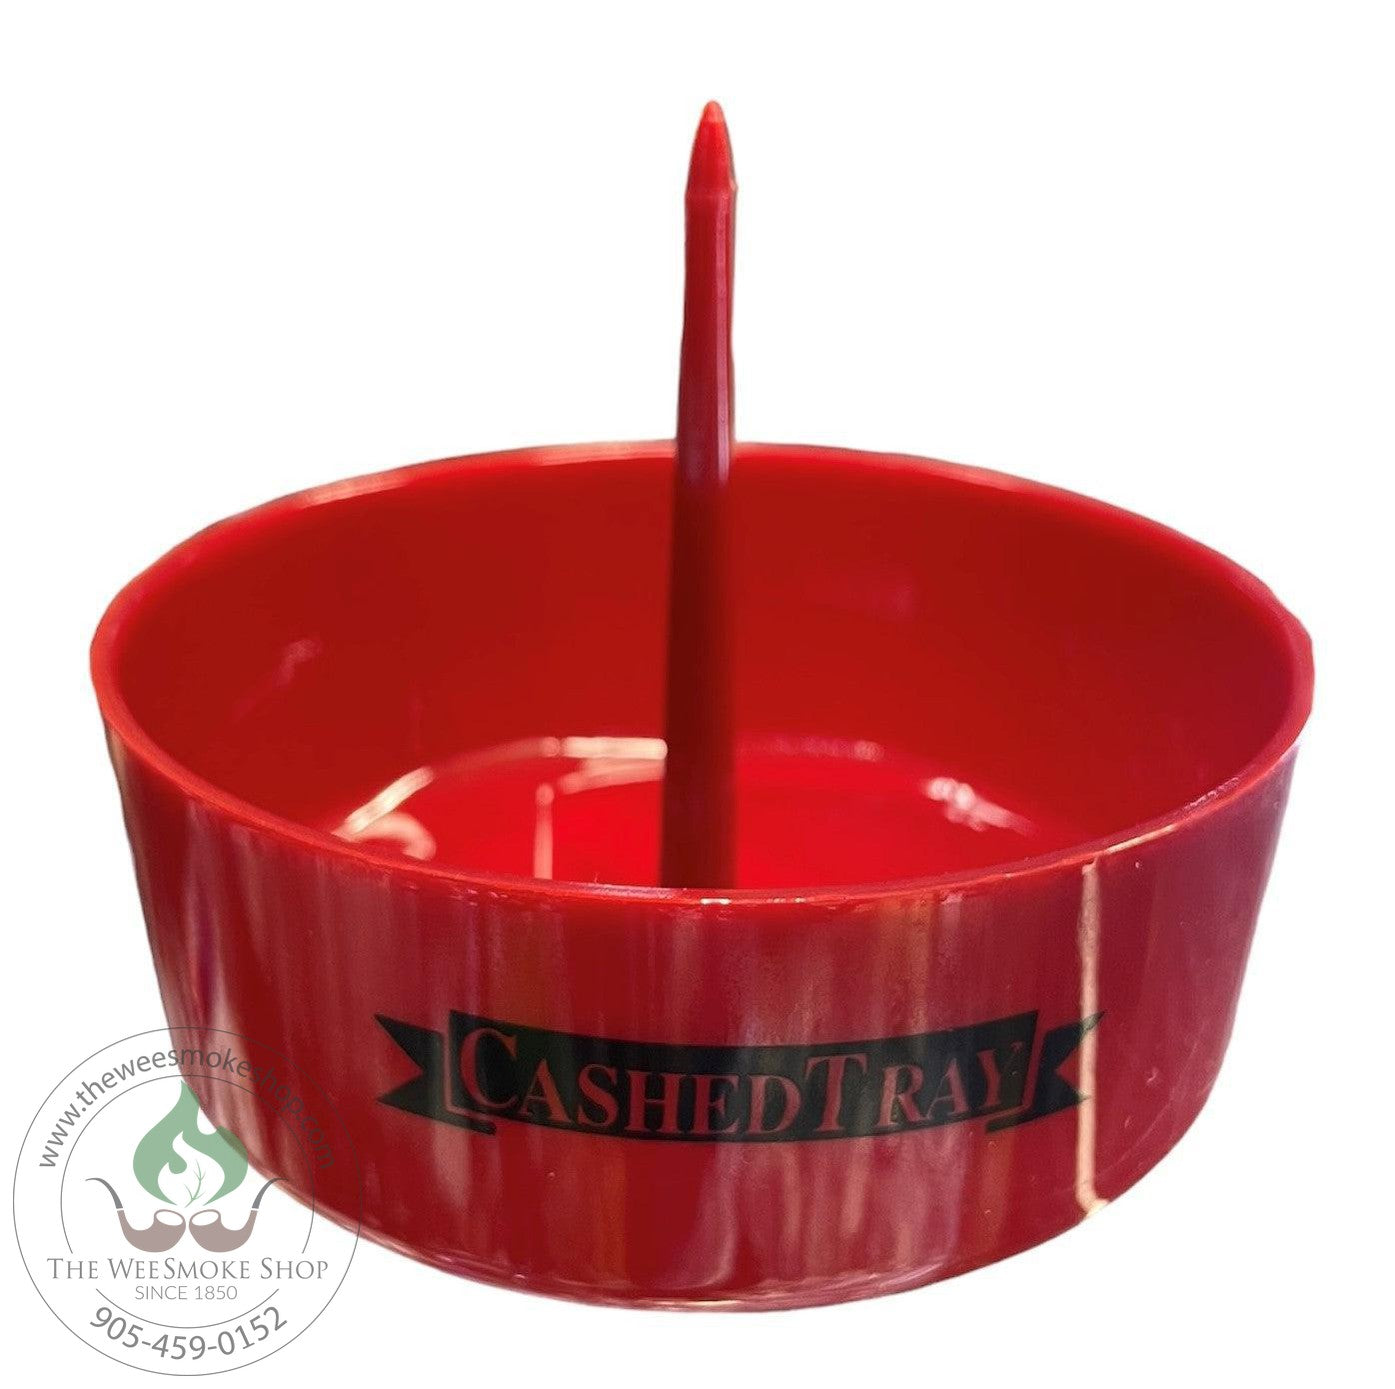 Bowl Ash Tray - Red - The wee Smoke Shop